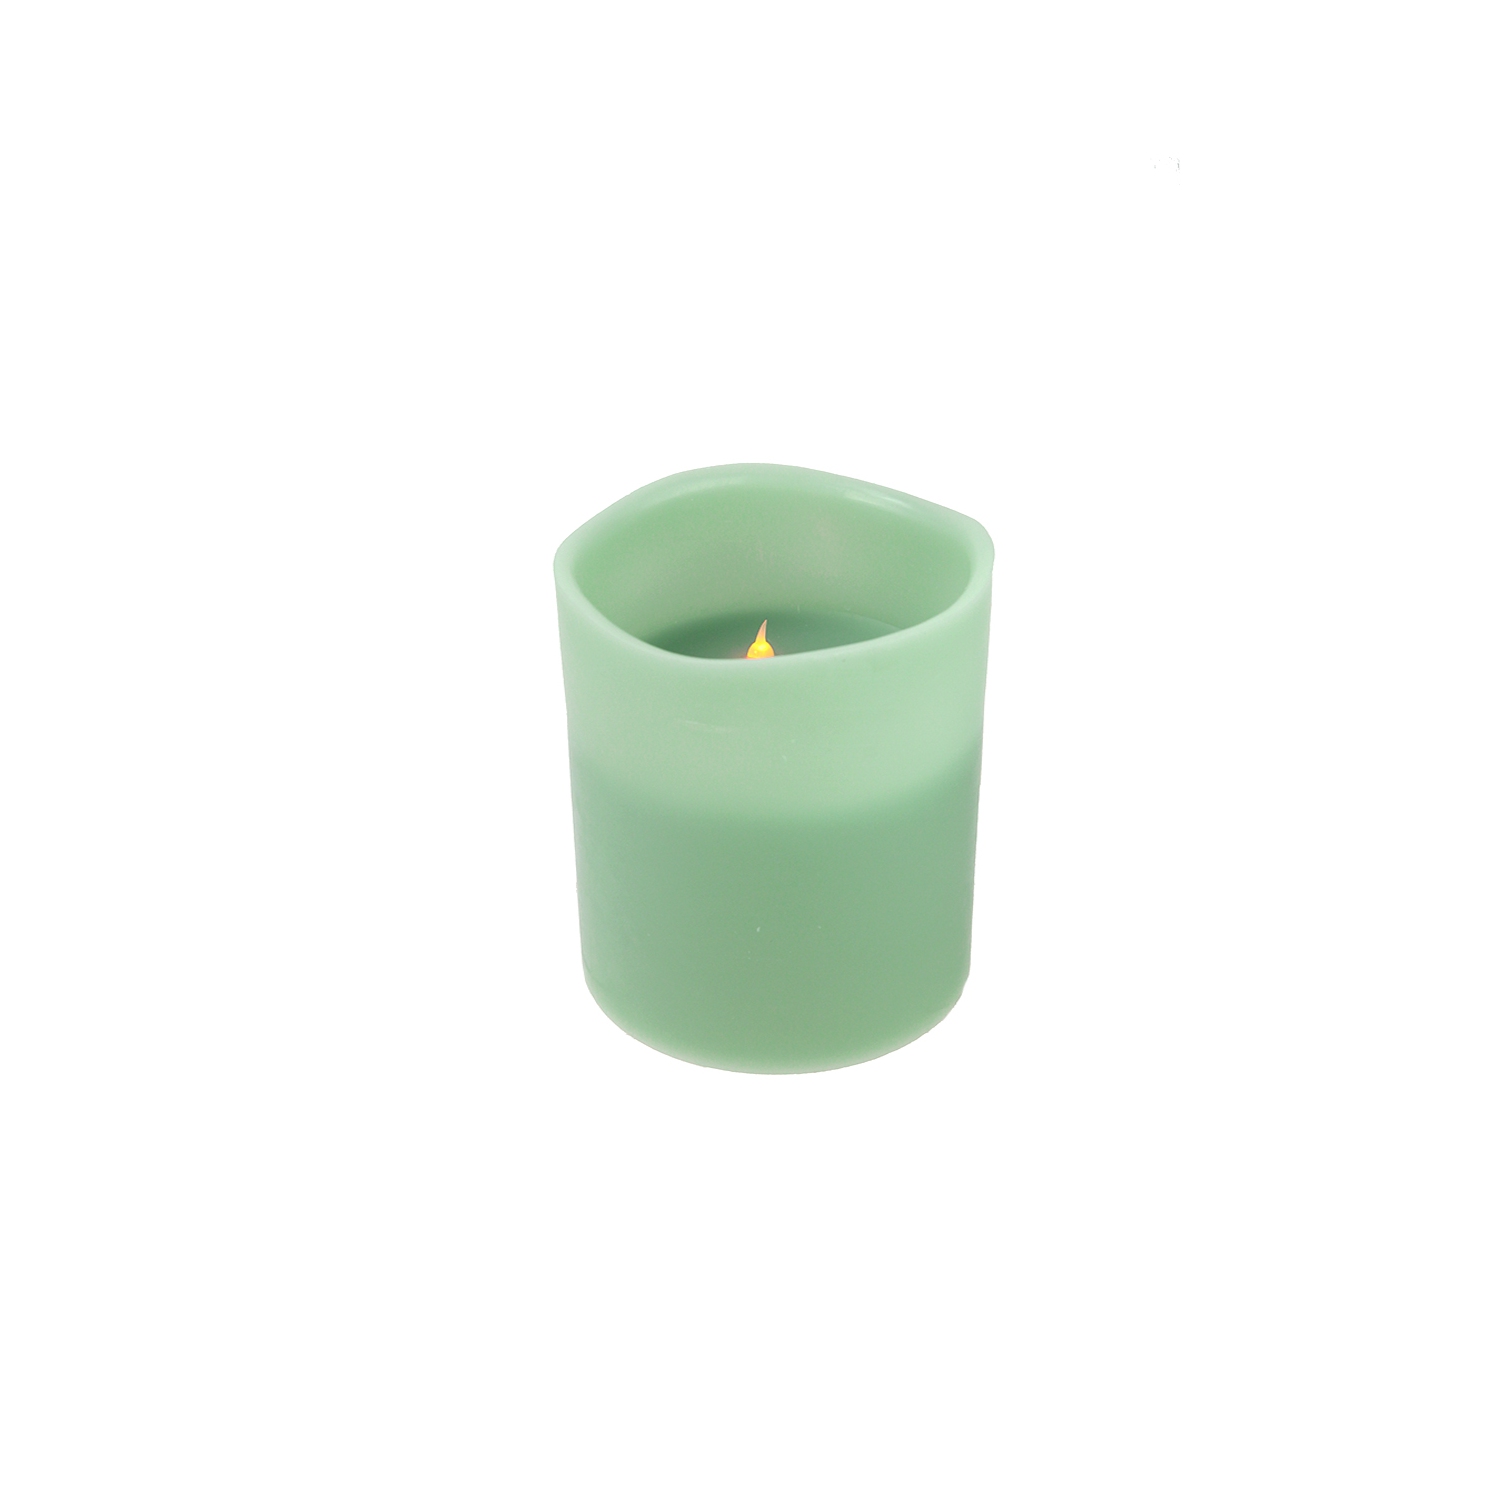 8" Sage Green Battery Operated Flameless LED Lighted 3-Wick Flickering Wax Christmas Pillar Candle